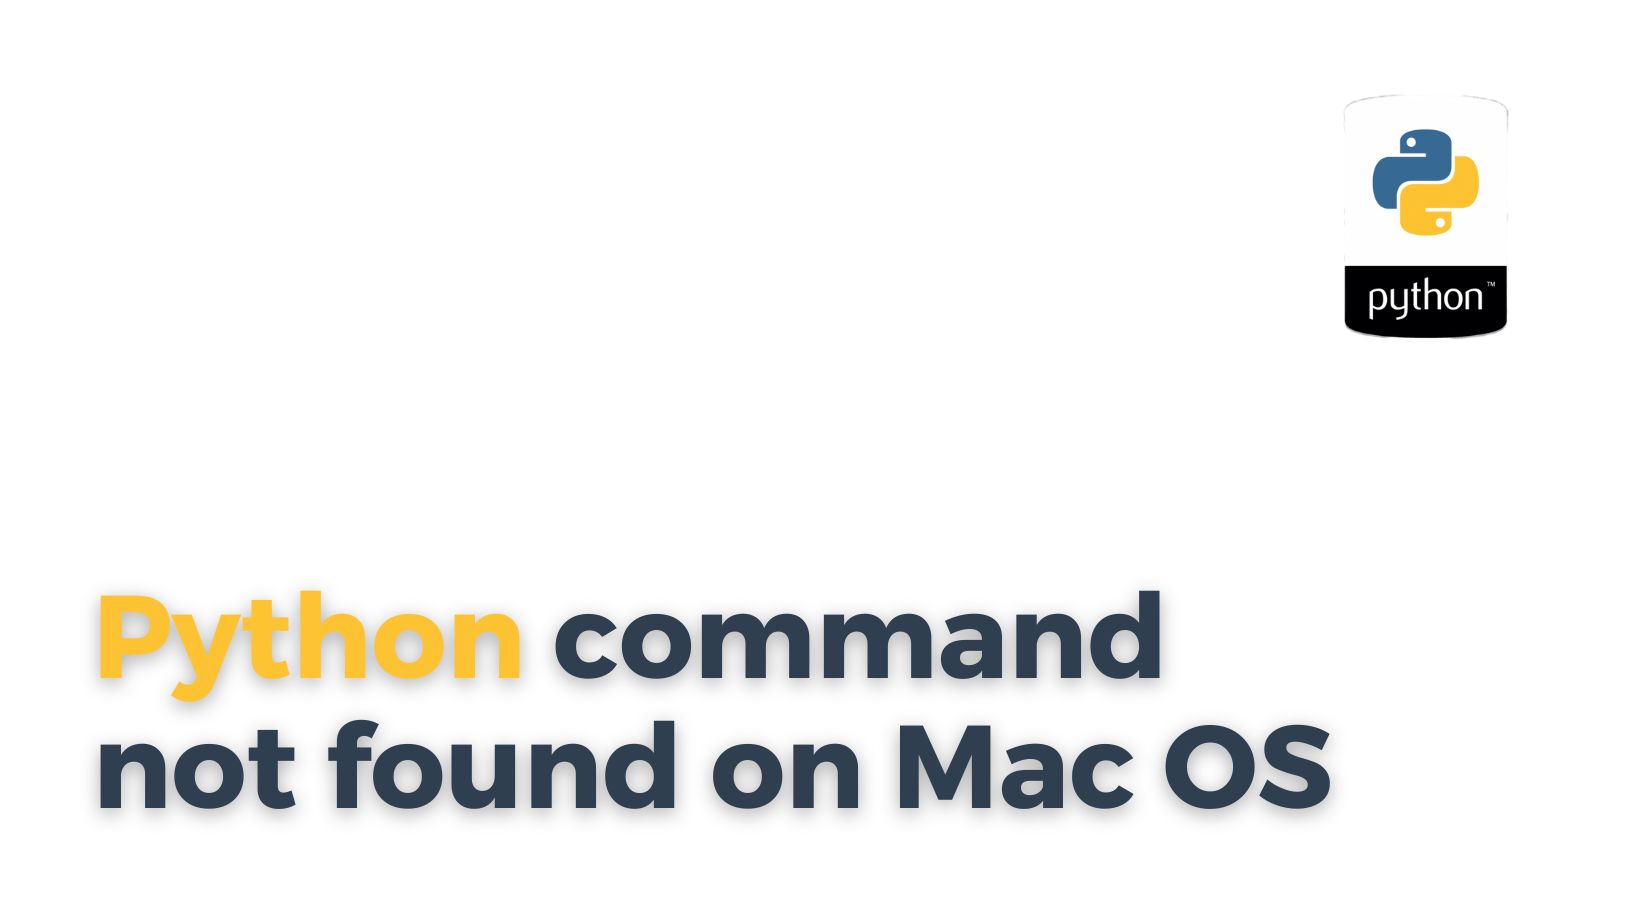 Python command not found on Mac OS